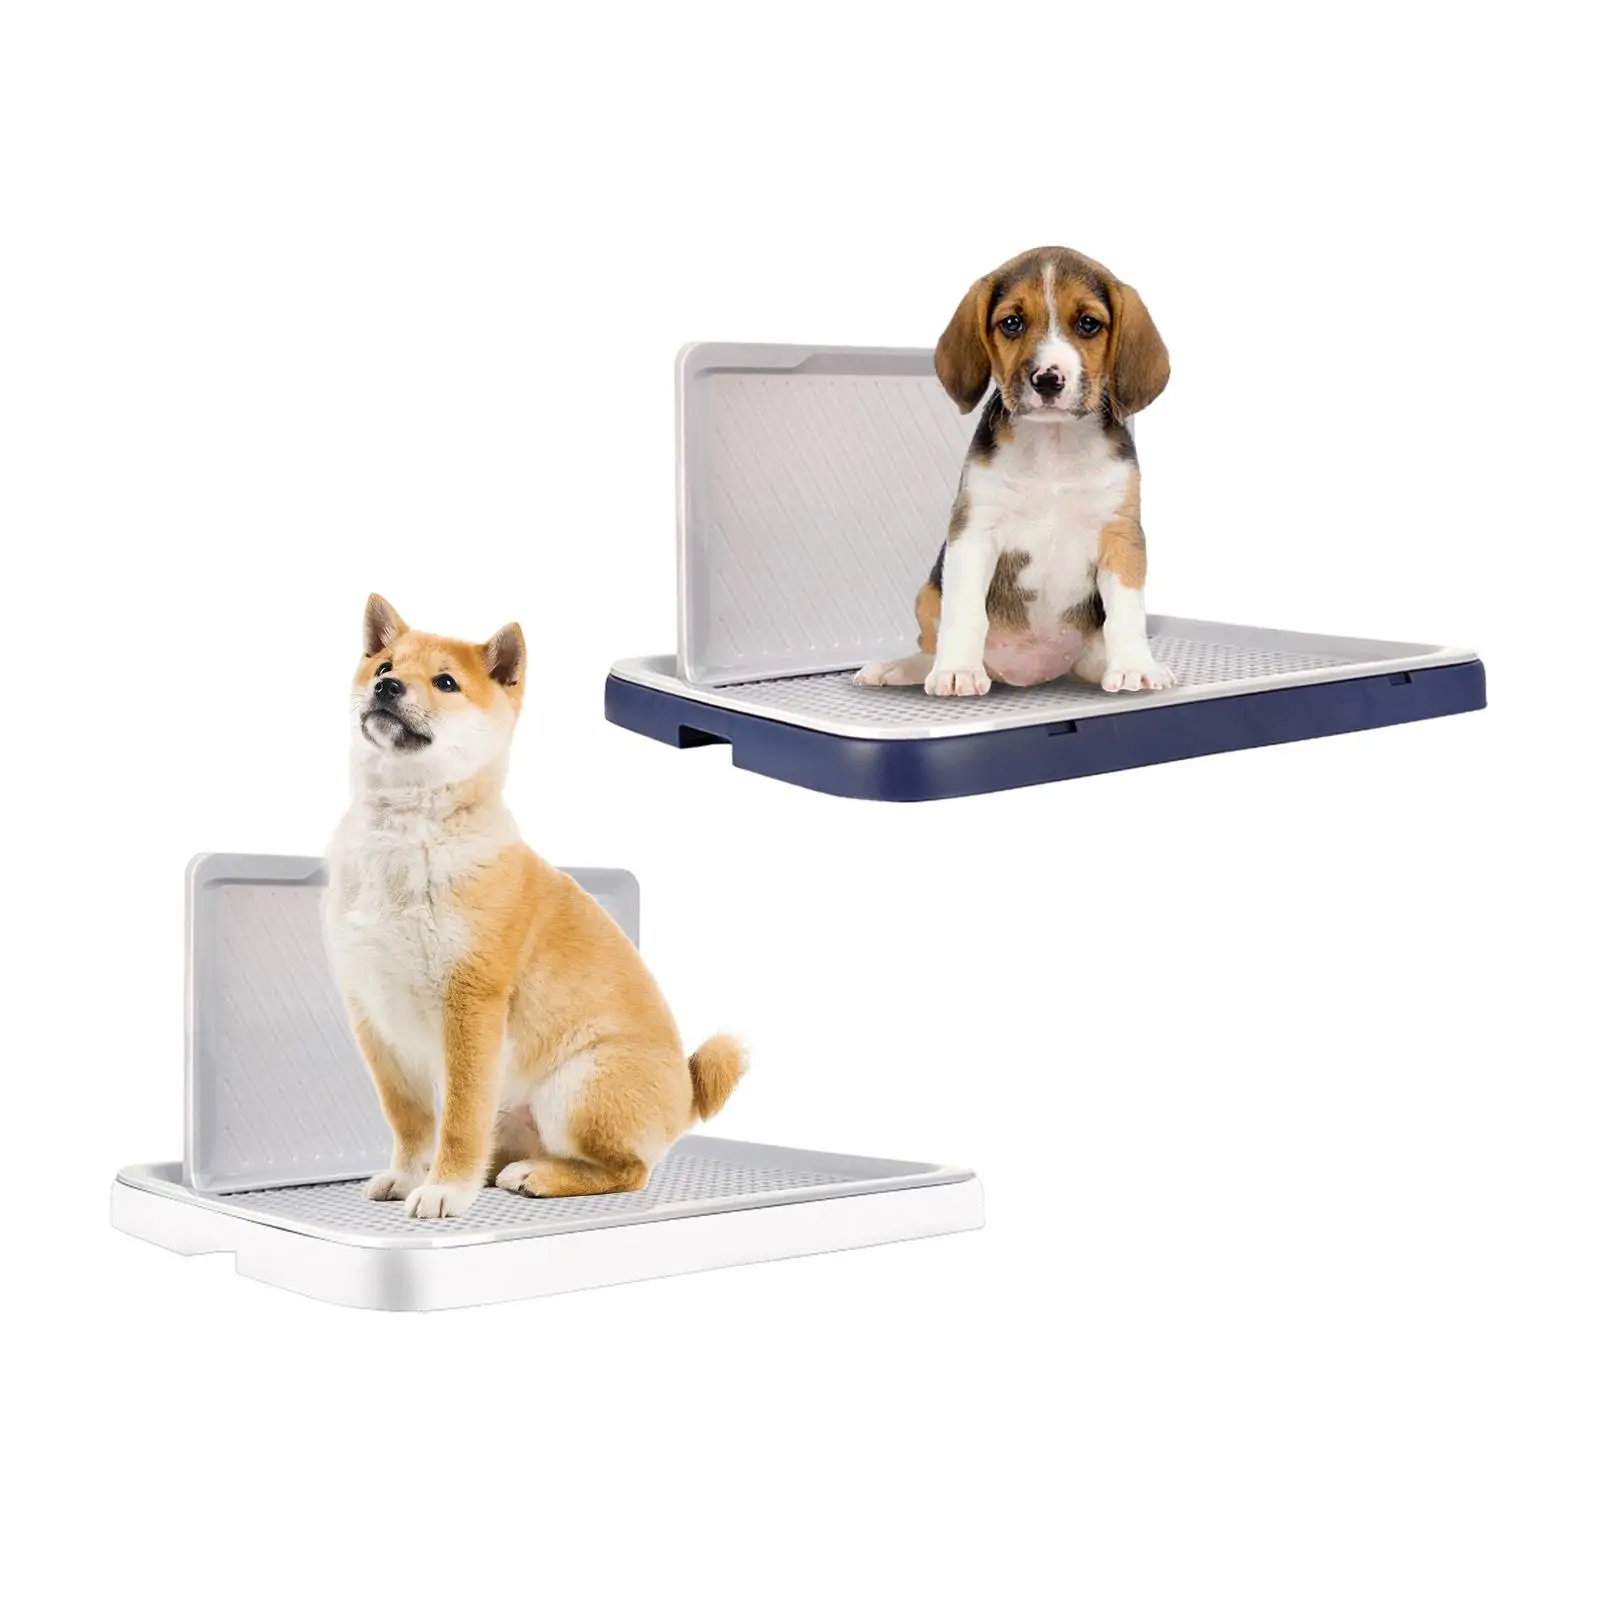 Portable Pet Dog Toilet Puppy Potty Tray Cleaning Tool Removable Litter Tray Training Pad Holder Potty Trainer Corner for Porch